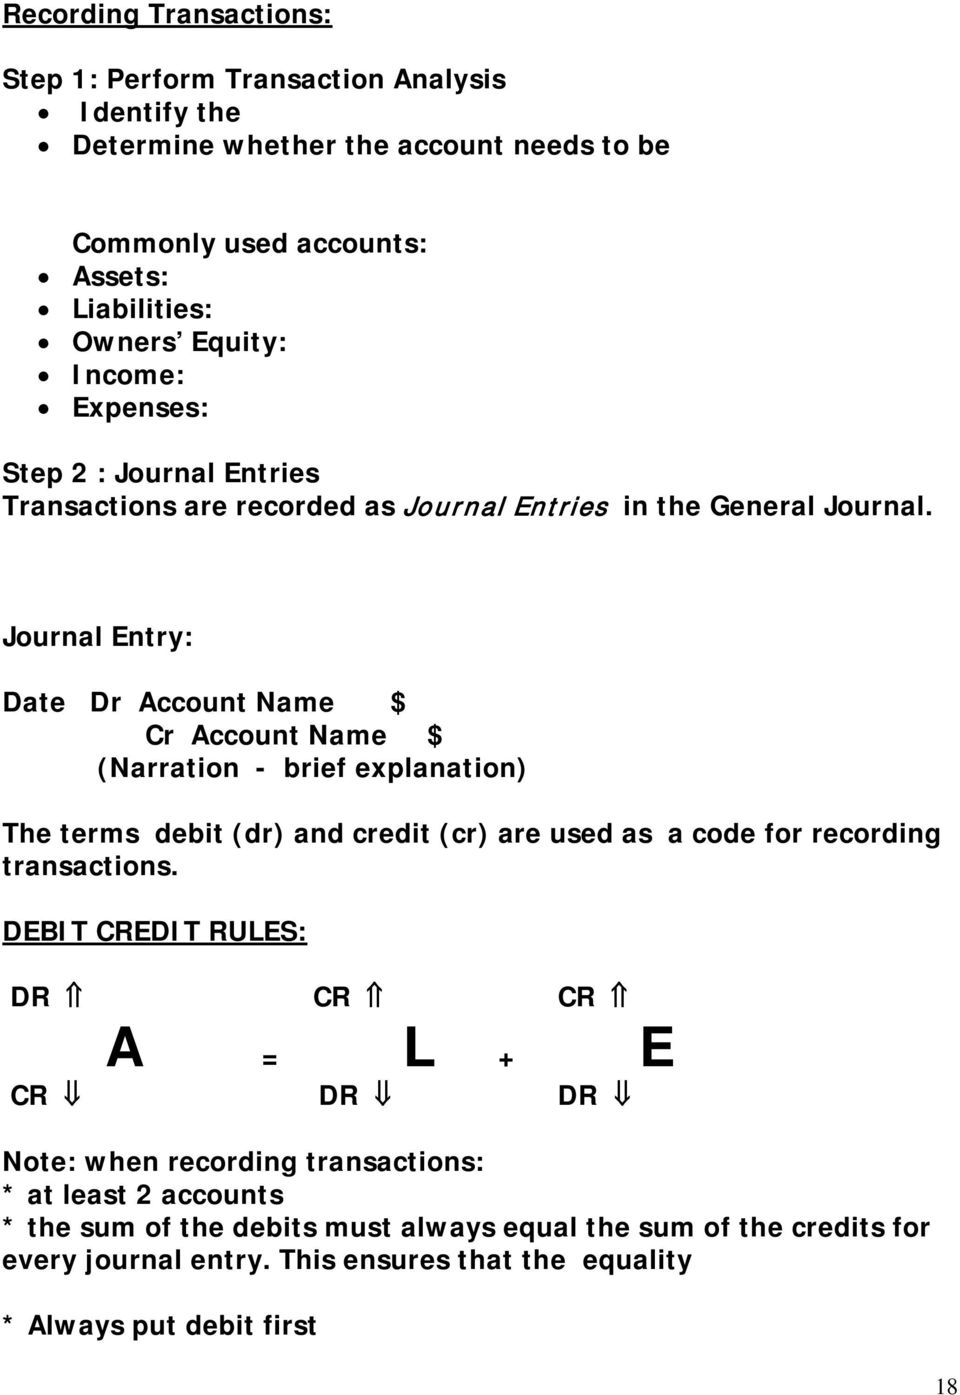 Journal Entry: Date Dr Account Name $ Cr Account Name $ (Narration - brief explanation) The terms debit (dr) and credit (cr) are used as a code for recording transactions.